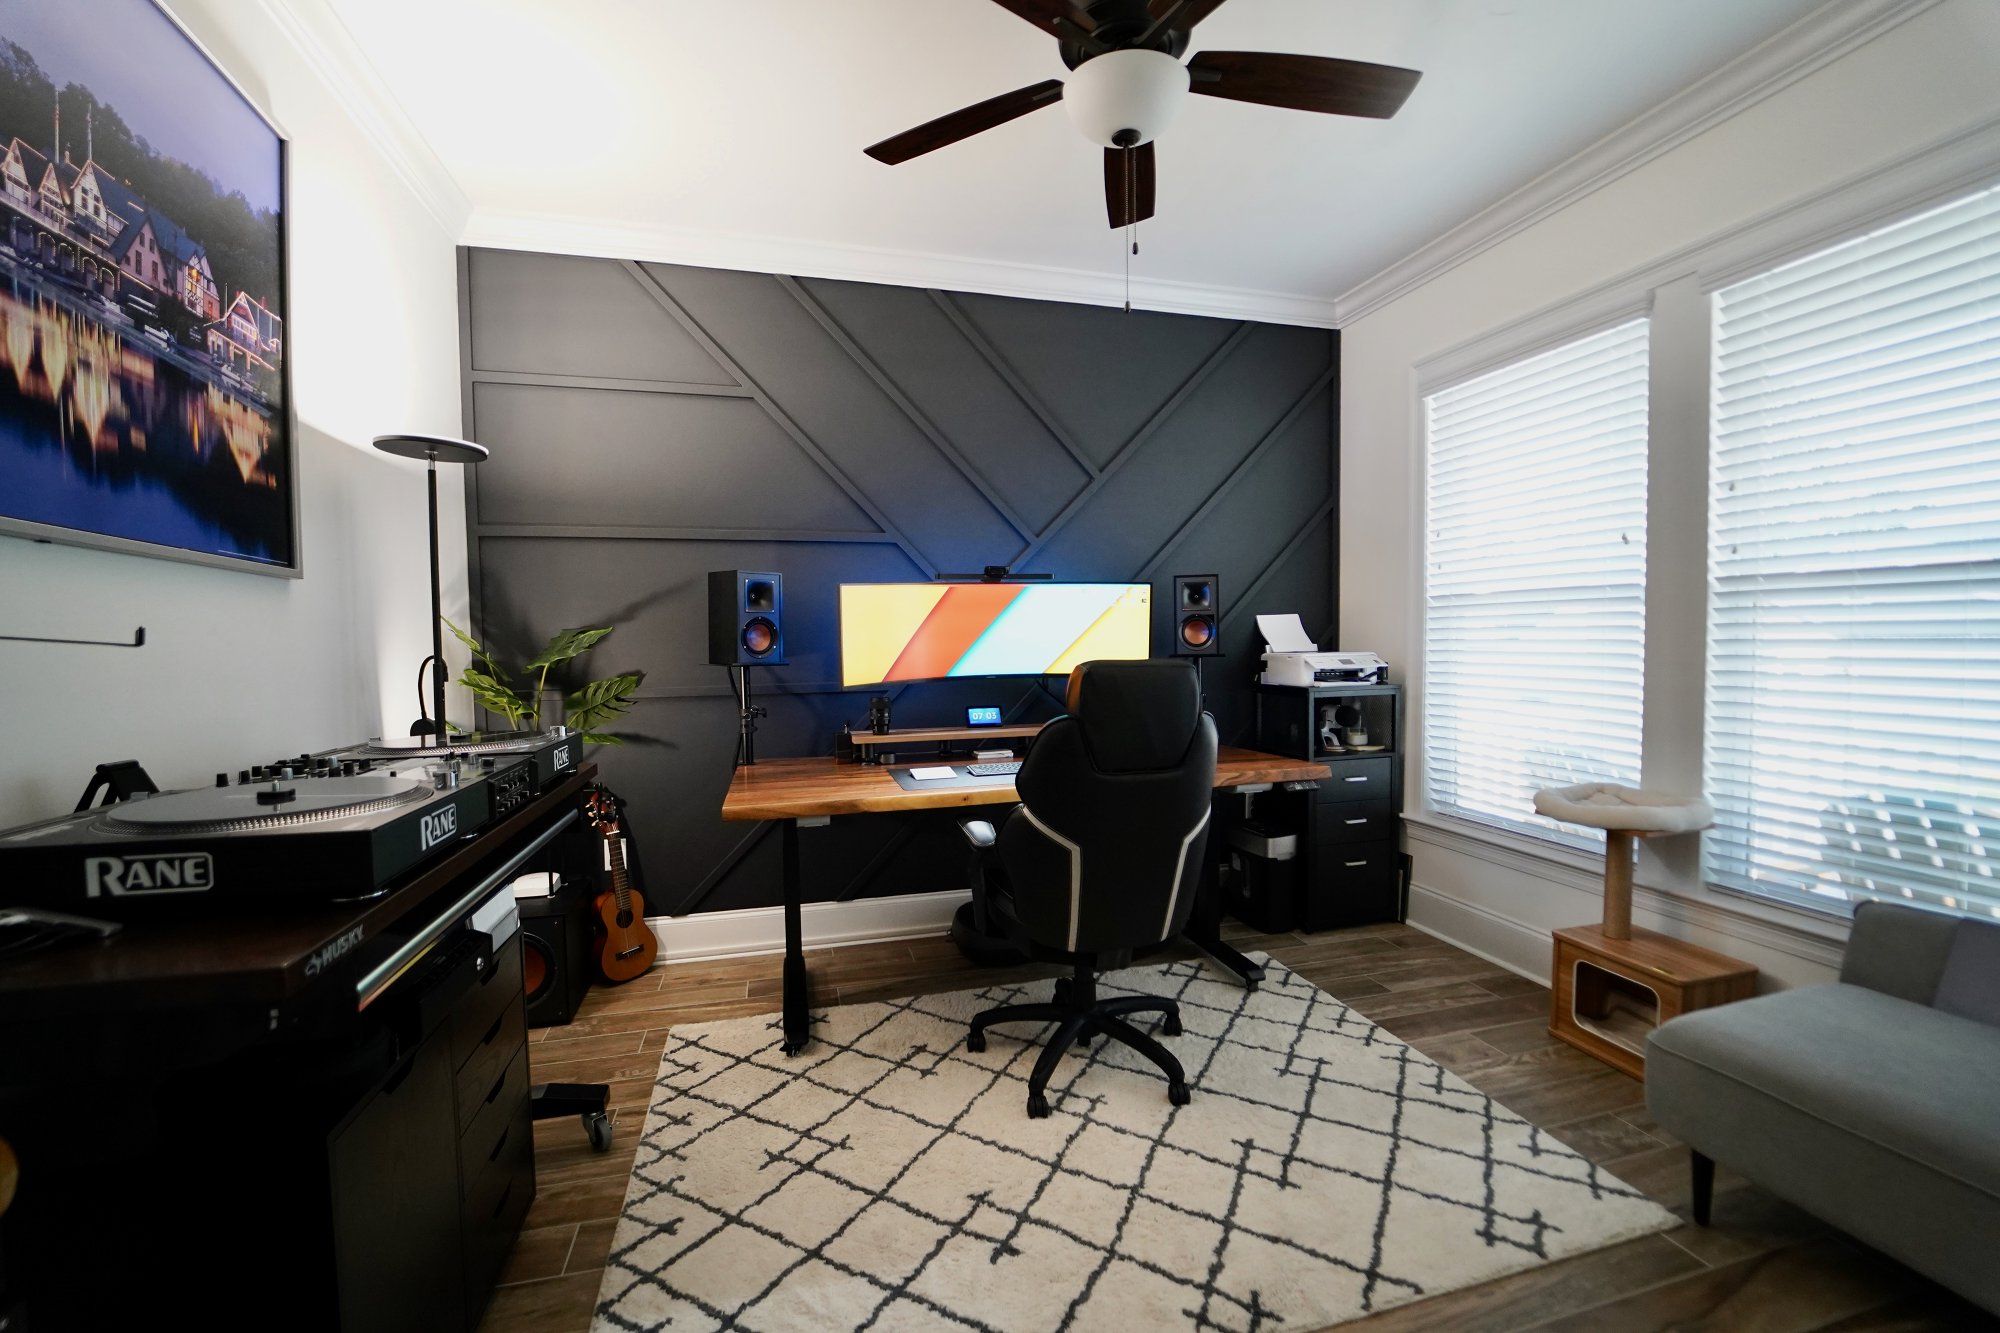 A well-designed home office with an ultrawide monitor, a cat house, and some DJ essentials